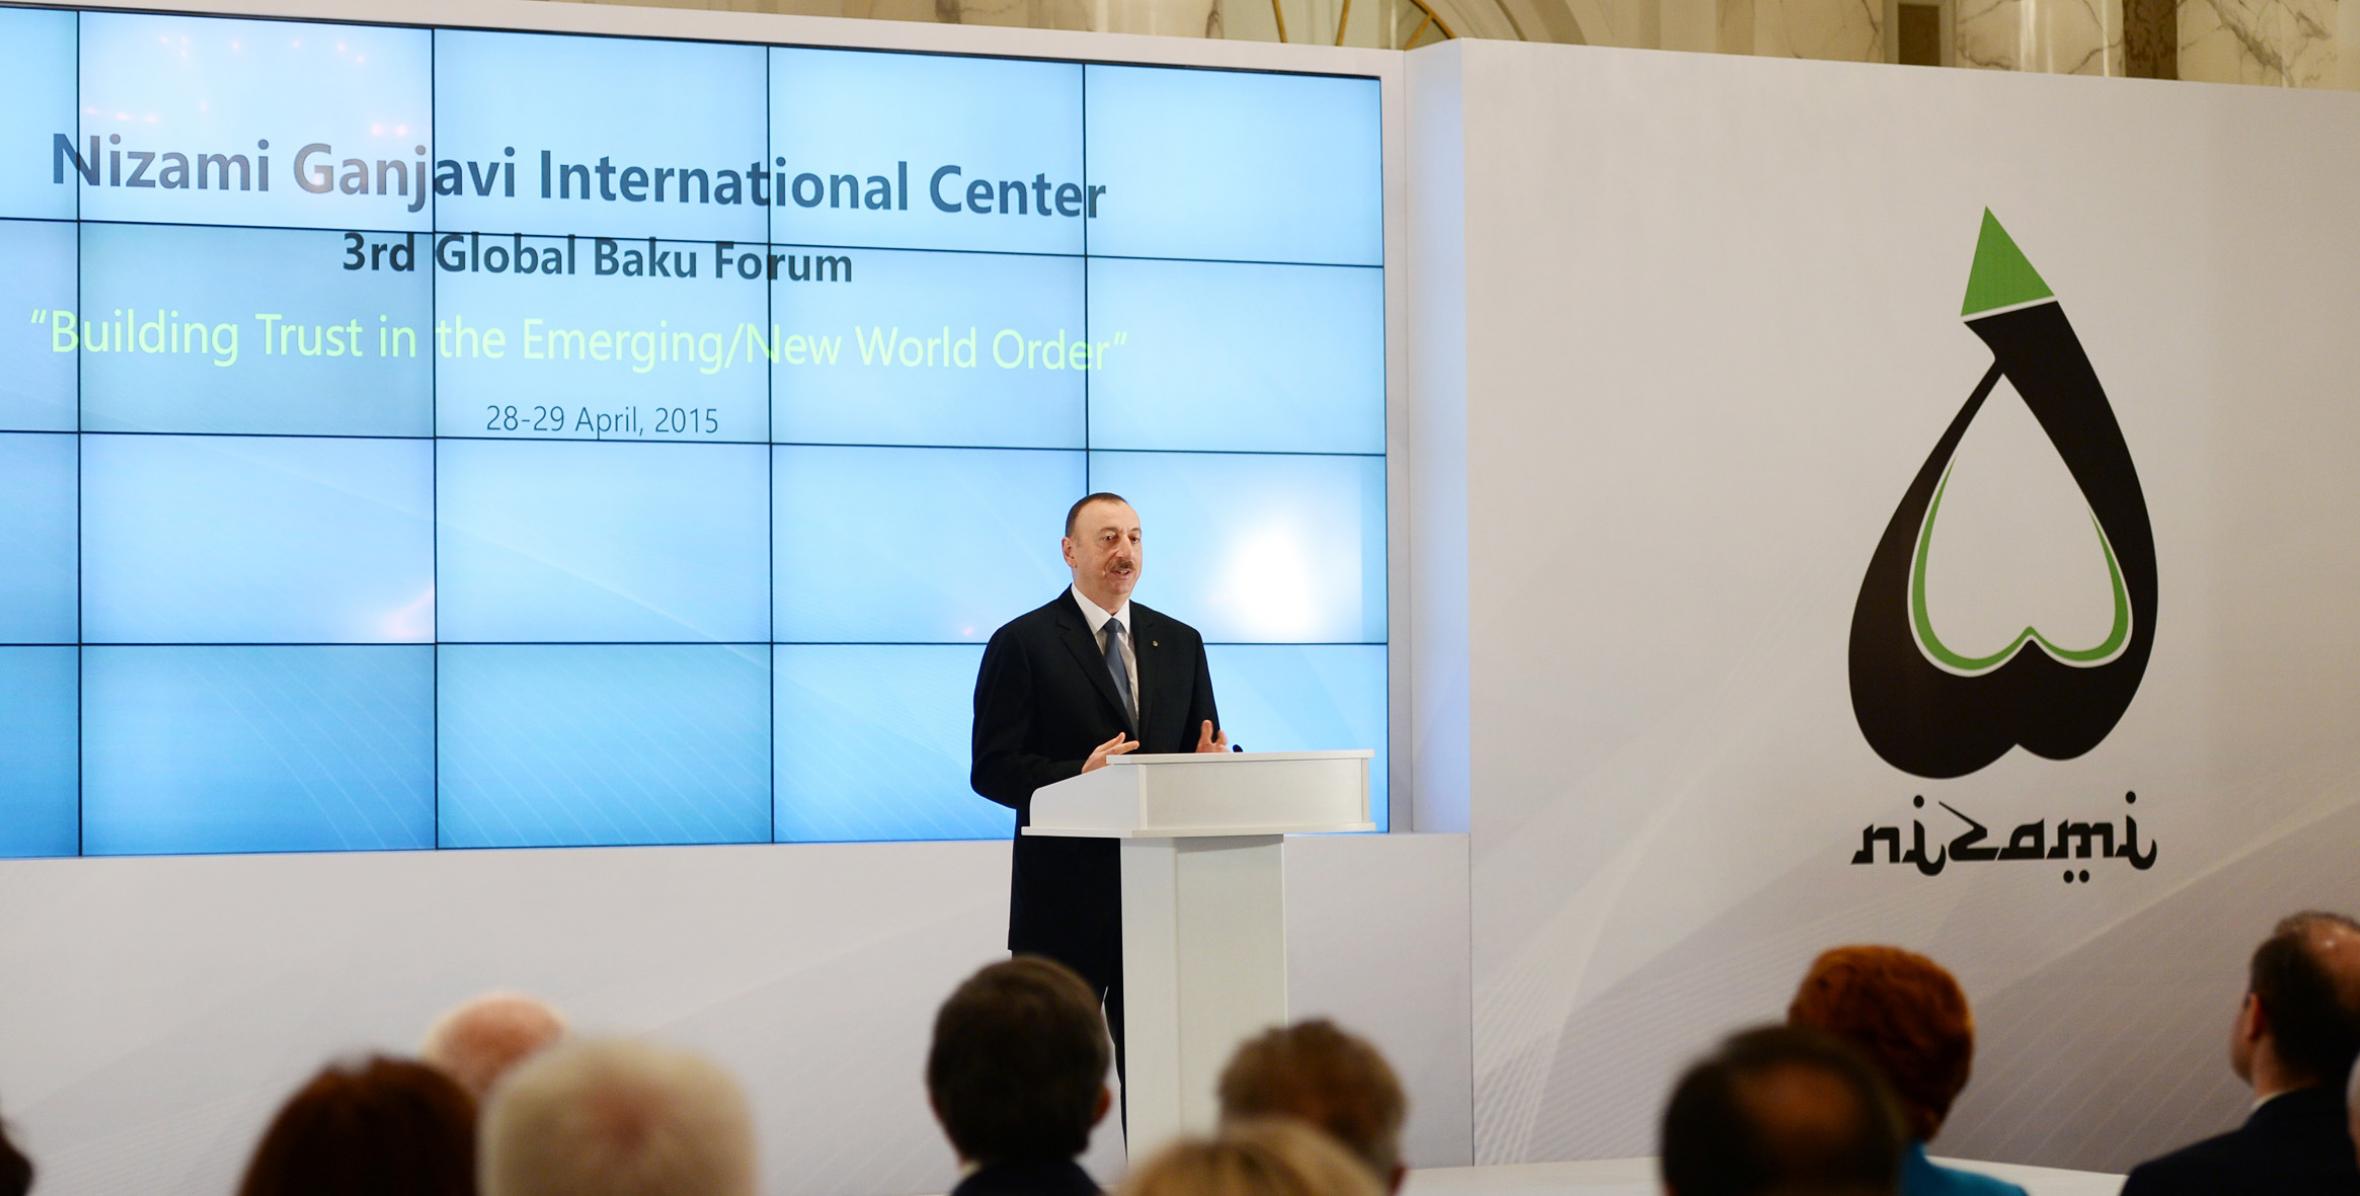 Ilham Aliyev attended the opening ceremony of the 3rd Global Baku Forum